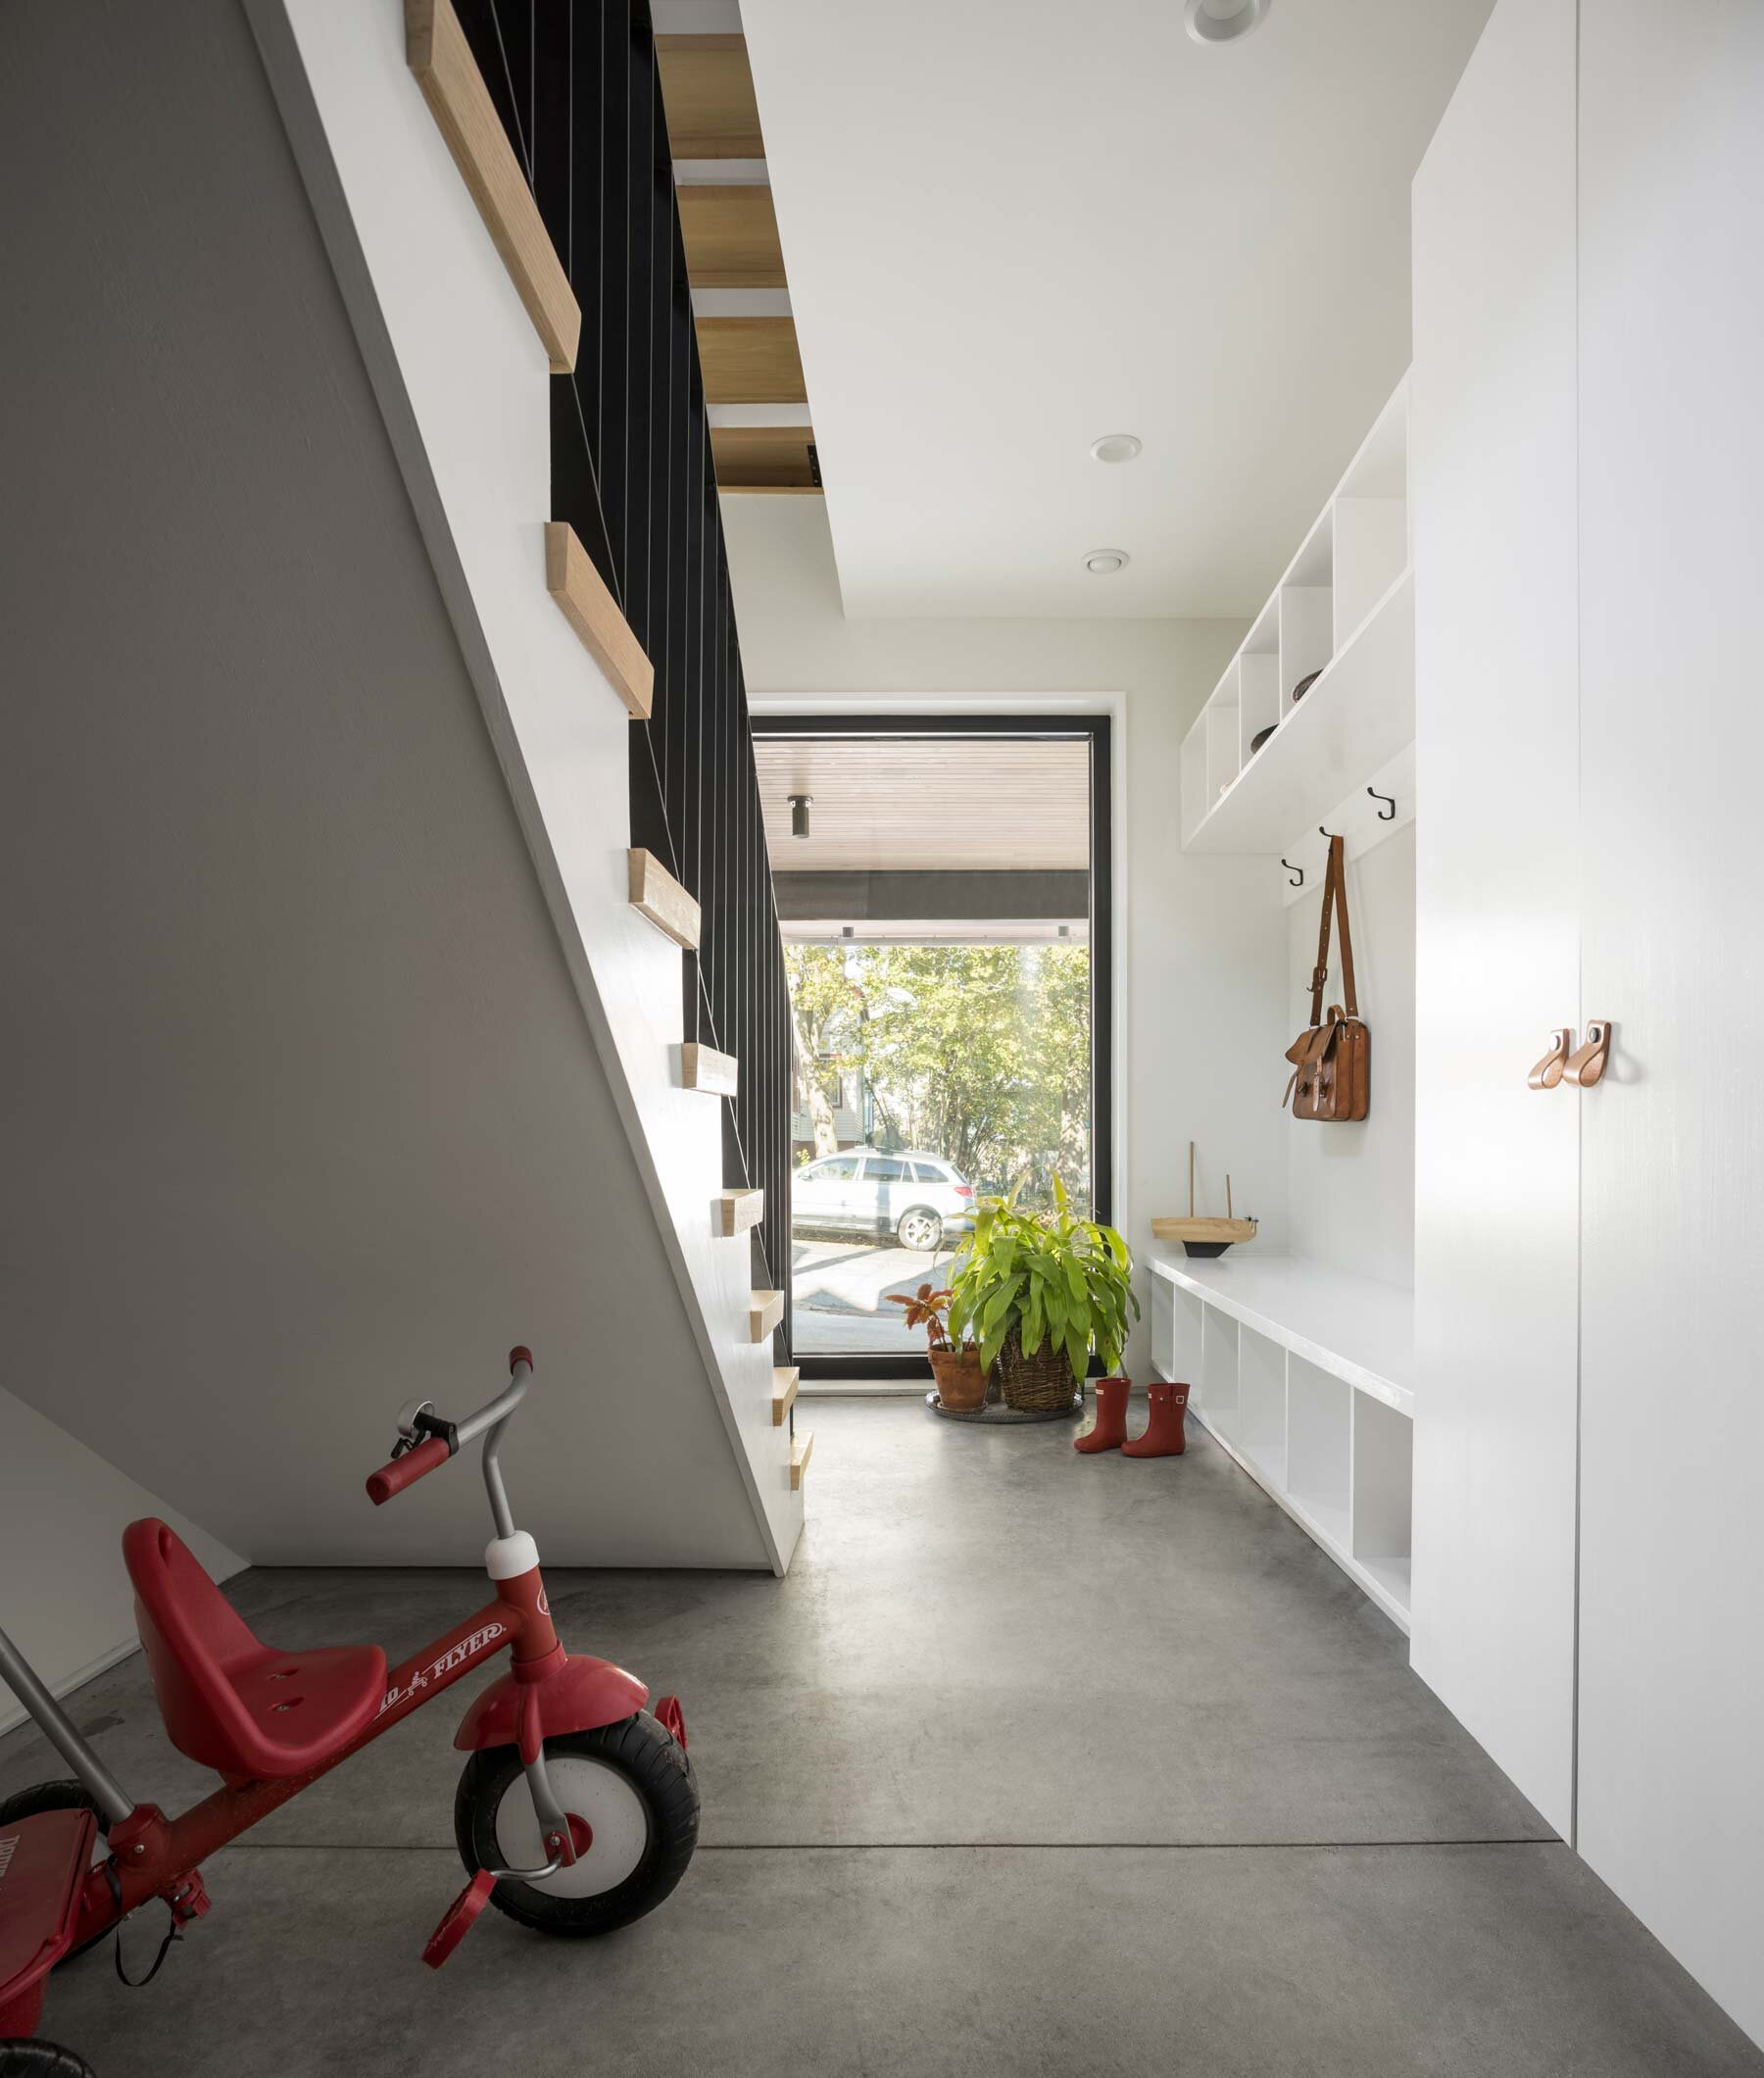  The mudroom’s concrete floor and plentiful cubbies make it easy to stay neat and organized, no matter the weather. 